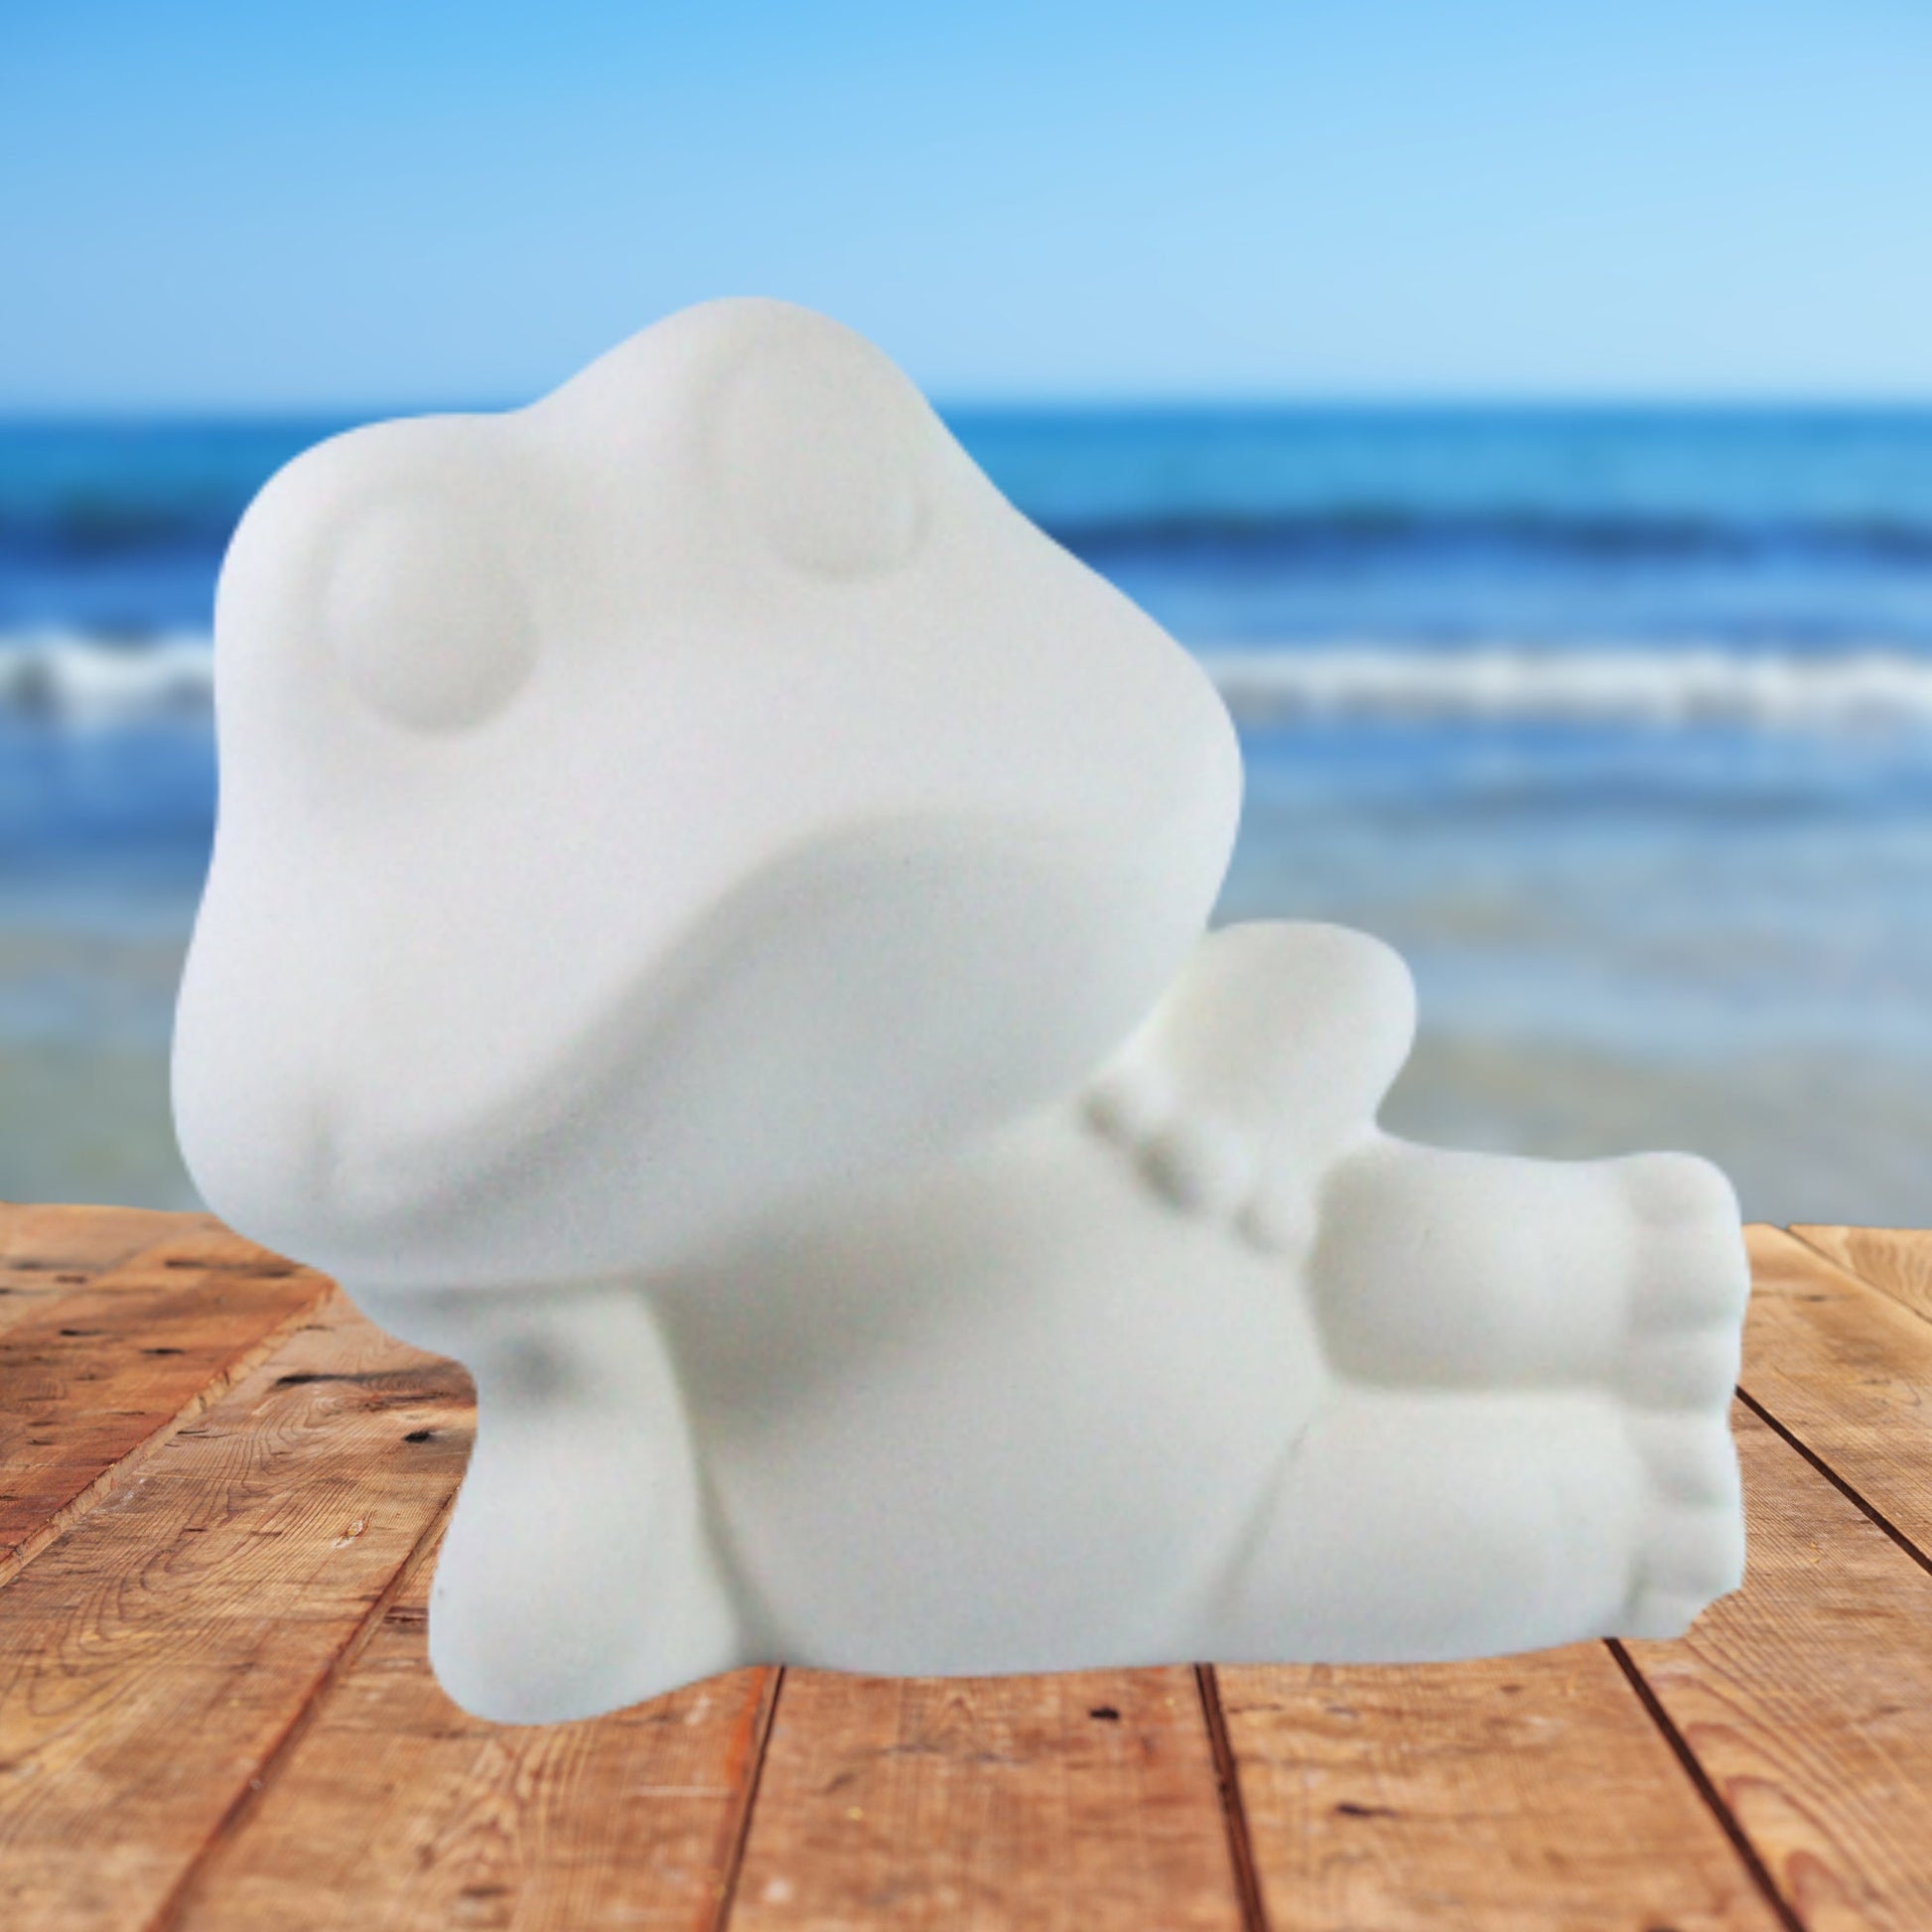 Handmade ready to paint ceramic frog lying on his right side with his head resting on his right hand lying on a wood table by the ocean.